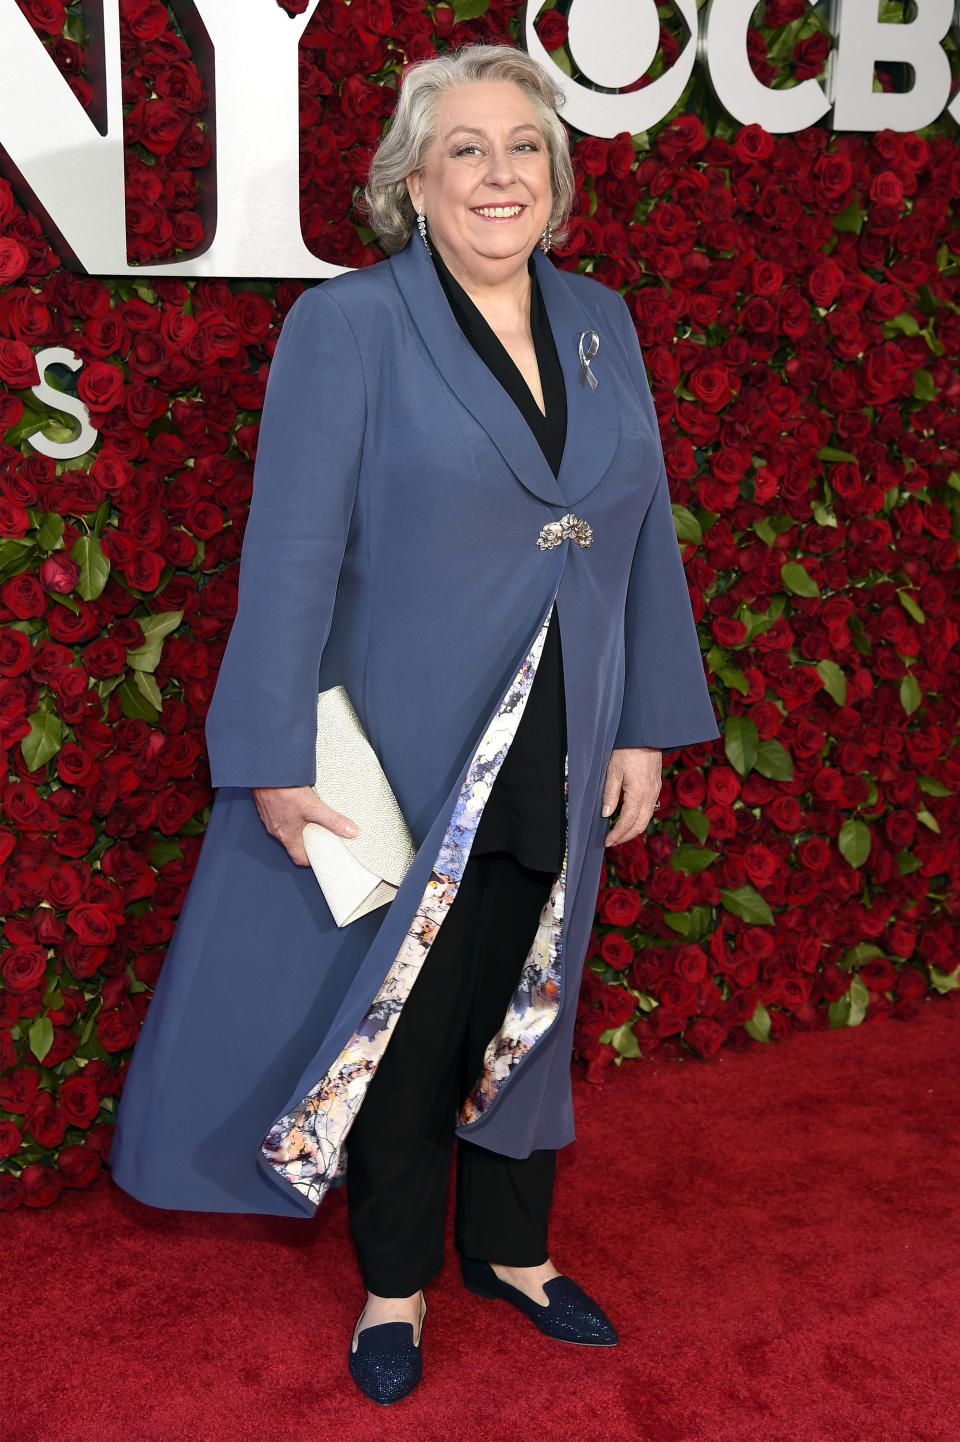 NEW YORK, NY - JUNE 12:  Actress Jayne Houdyshell attends the 70th Annual Tony Awards at The Beacon Theatre on June 12, 2016 in New York City.  (Photo by Kevin Mazur/Getty Images for Tony Awards Productions)